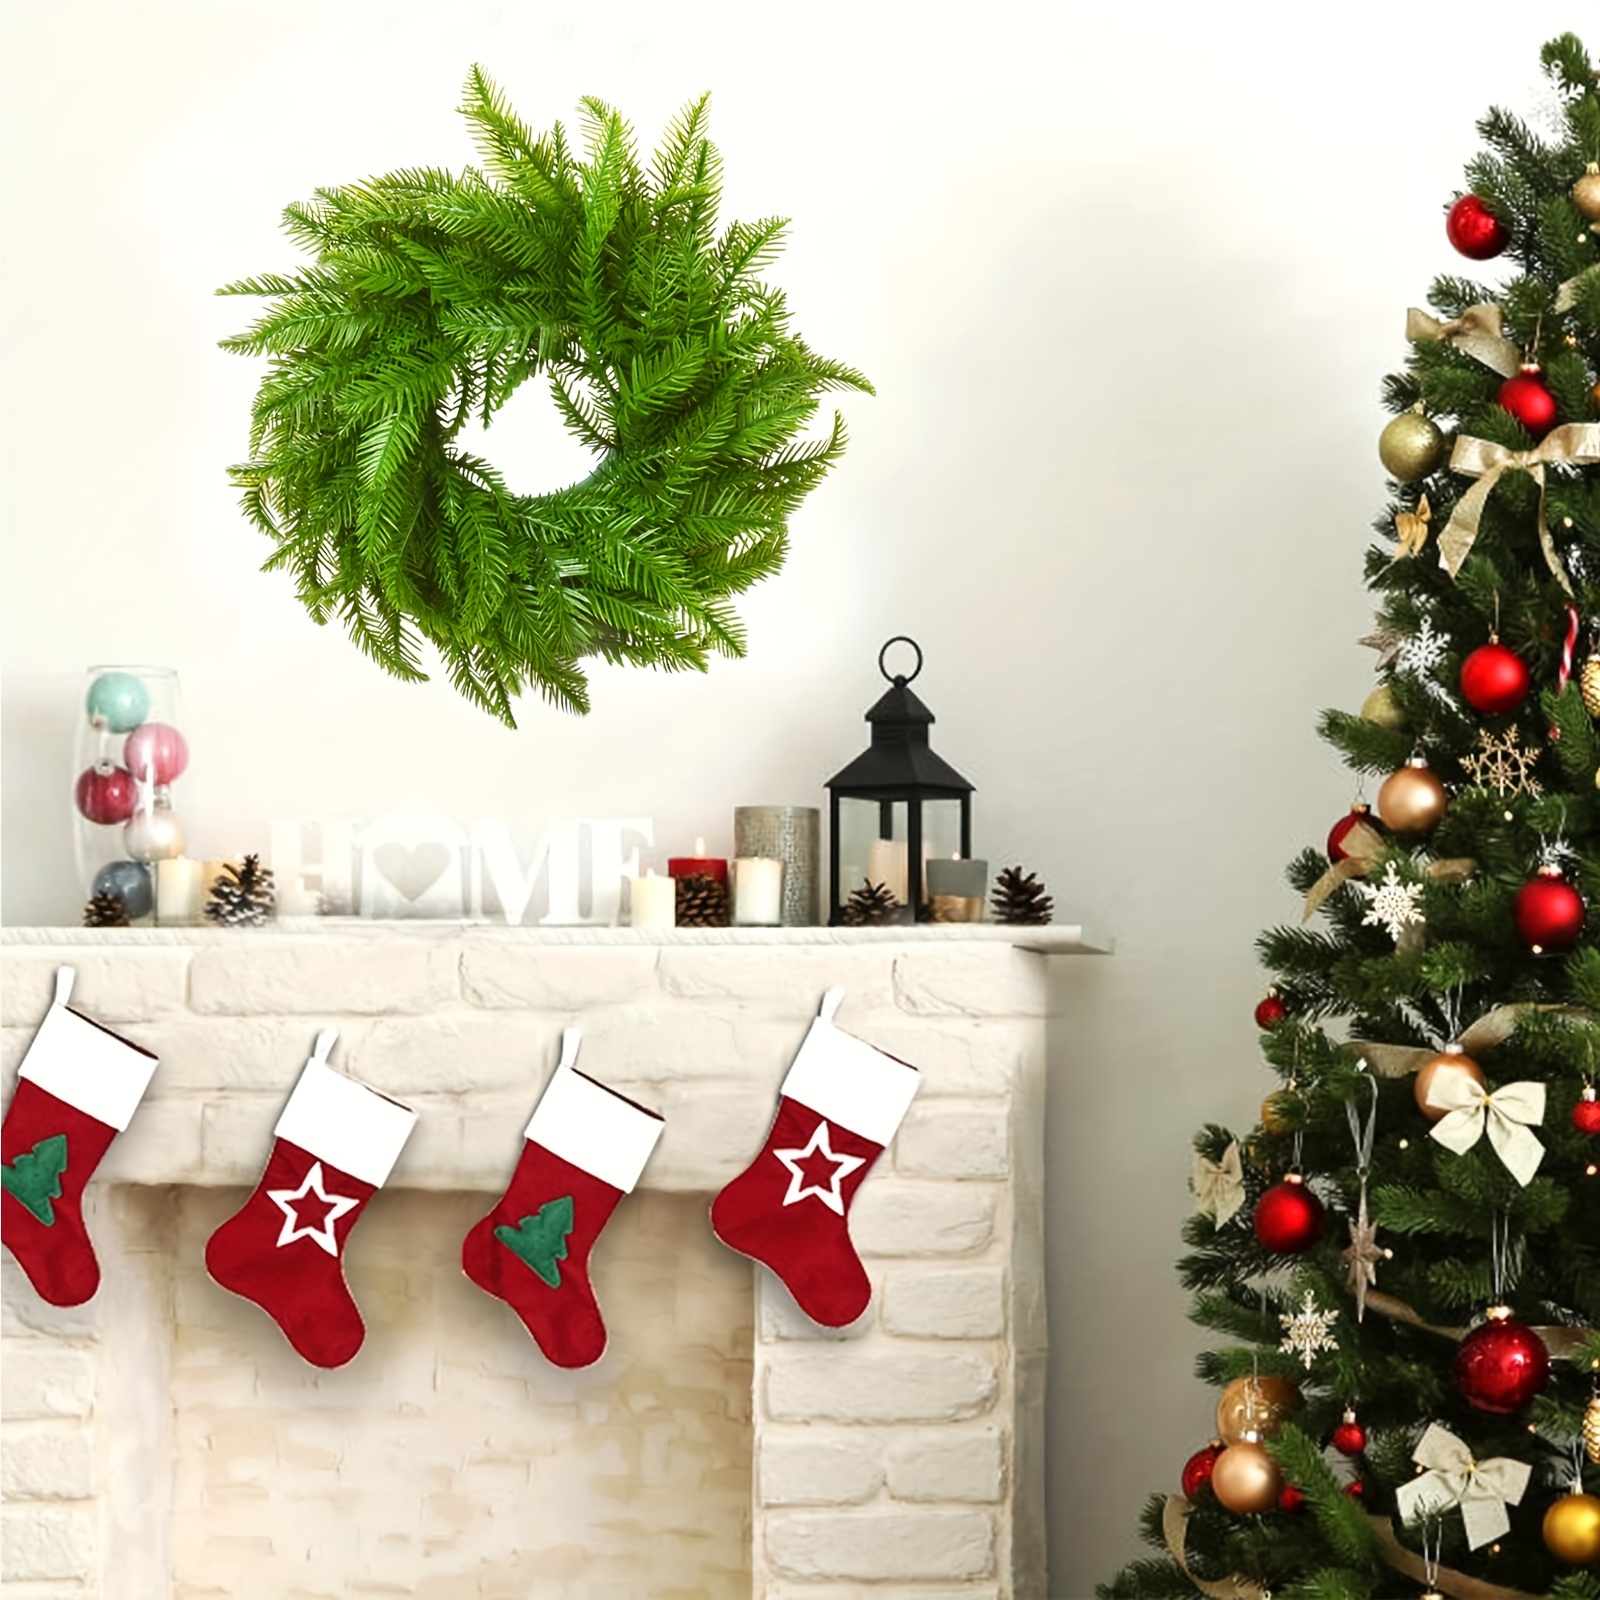 1pc artificial green pine needle wreath suitable for christmas decor plastic simulation green plant for family door front fireplace hanging indoor and outdoor christmas decorations